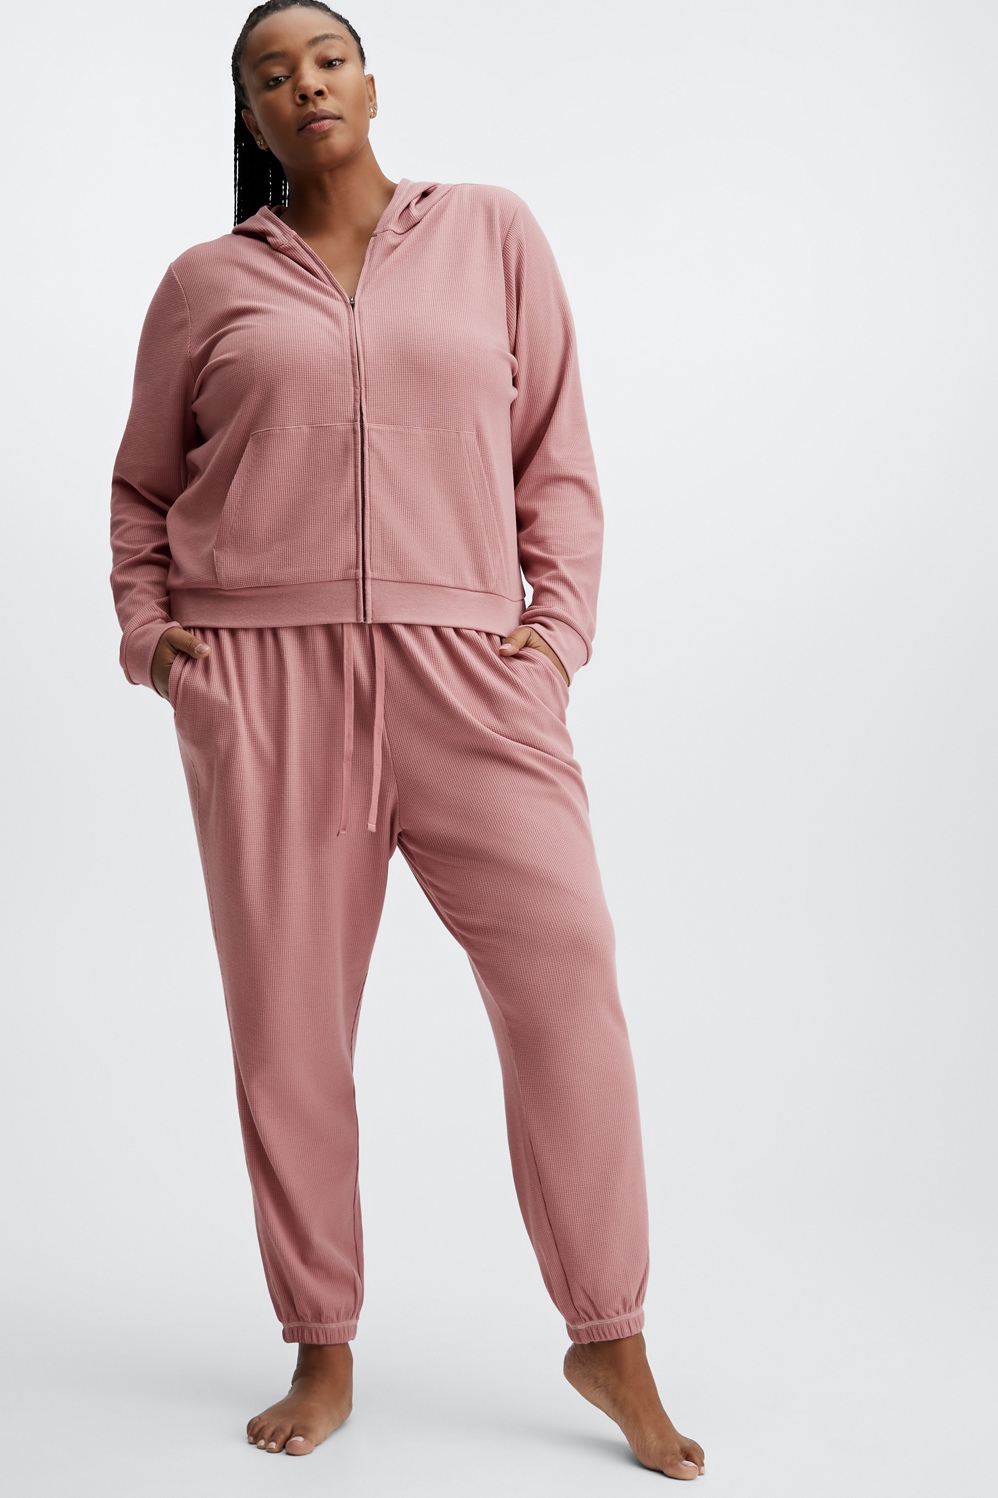 Fabletics Go-To Waffle Sweatpant Womens pink plus Size 3X